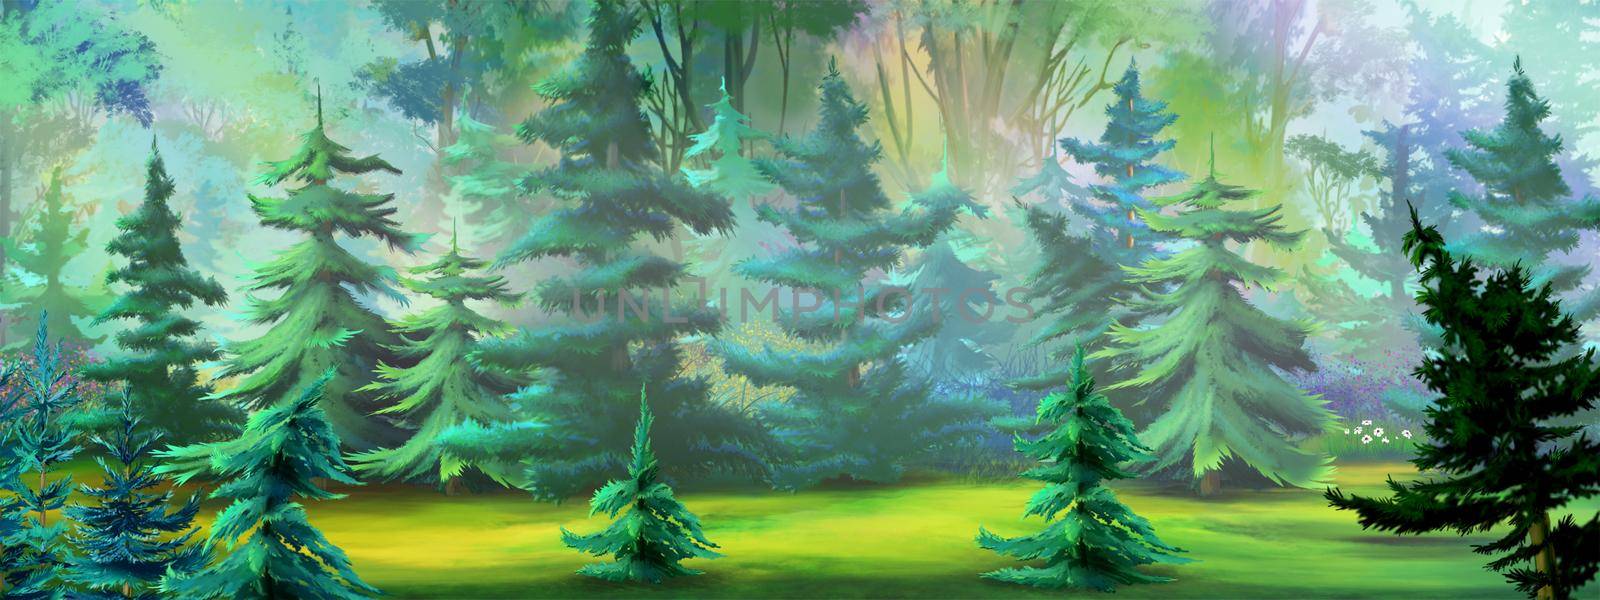 Fir trees in the coniferous forest by Multipedia